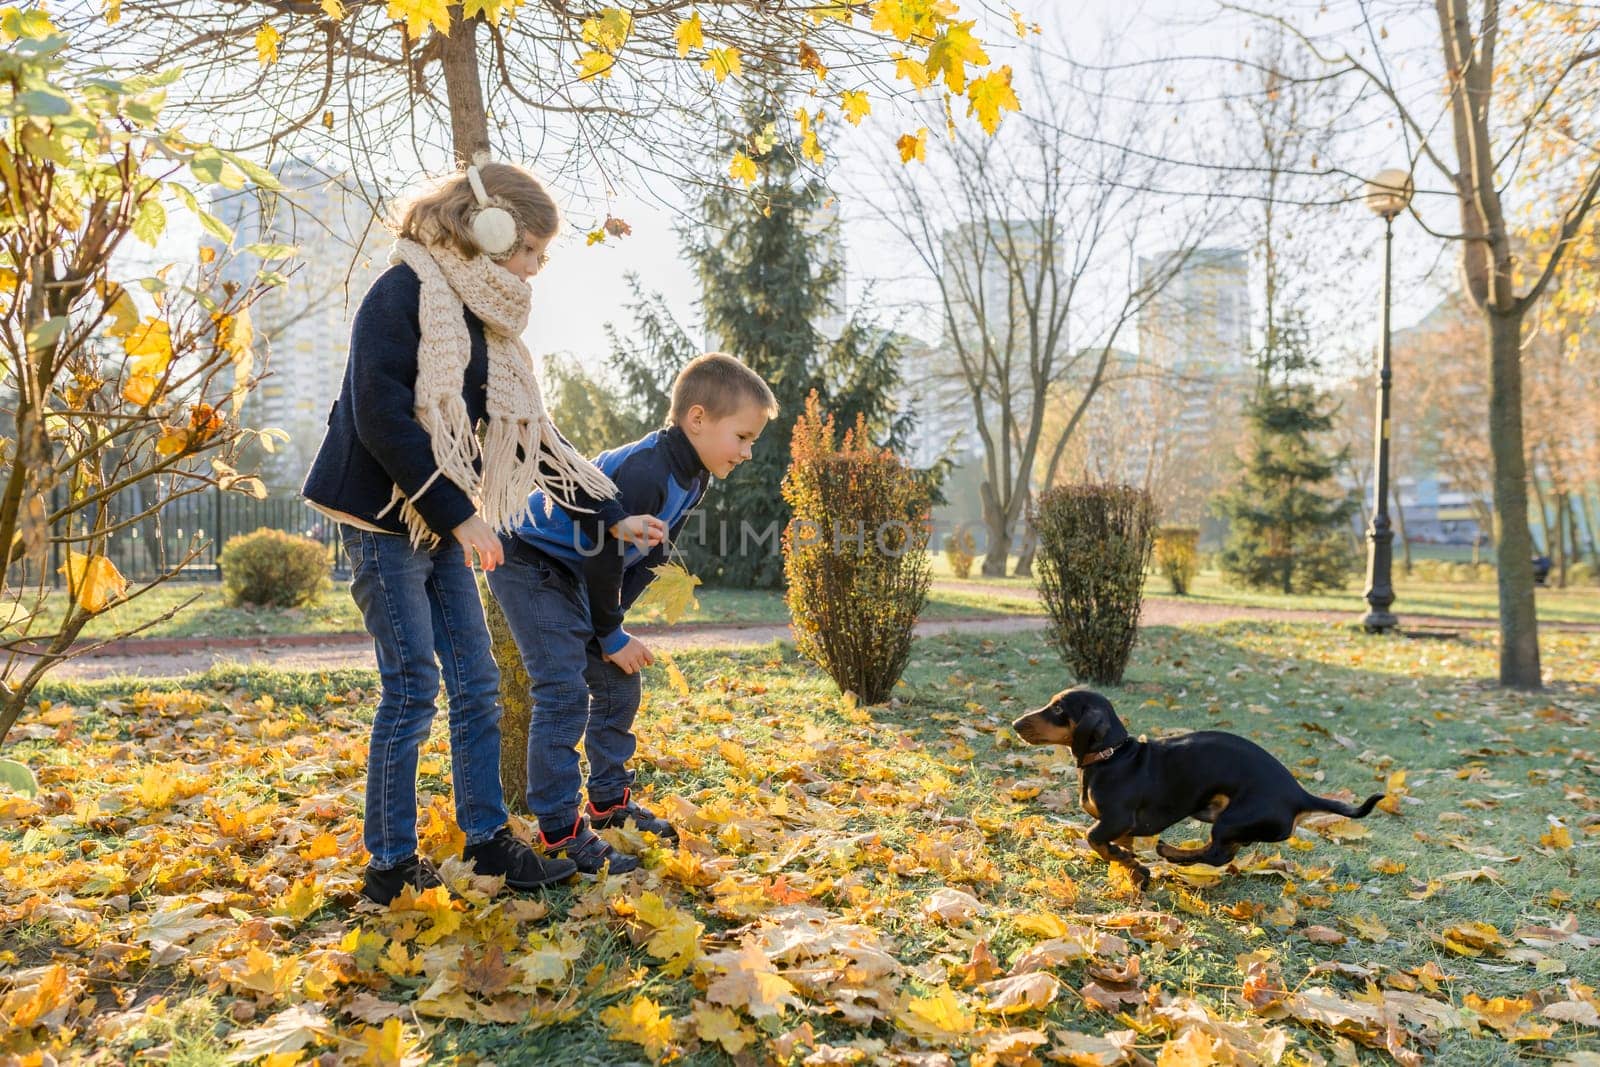 Children boy and girl playing with dachshund dog in a sunny autumn park, yellow leaf fall background